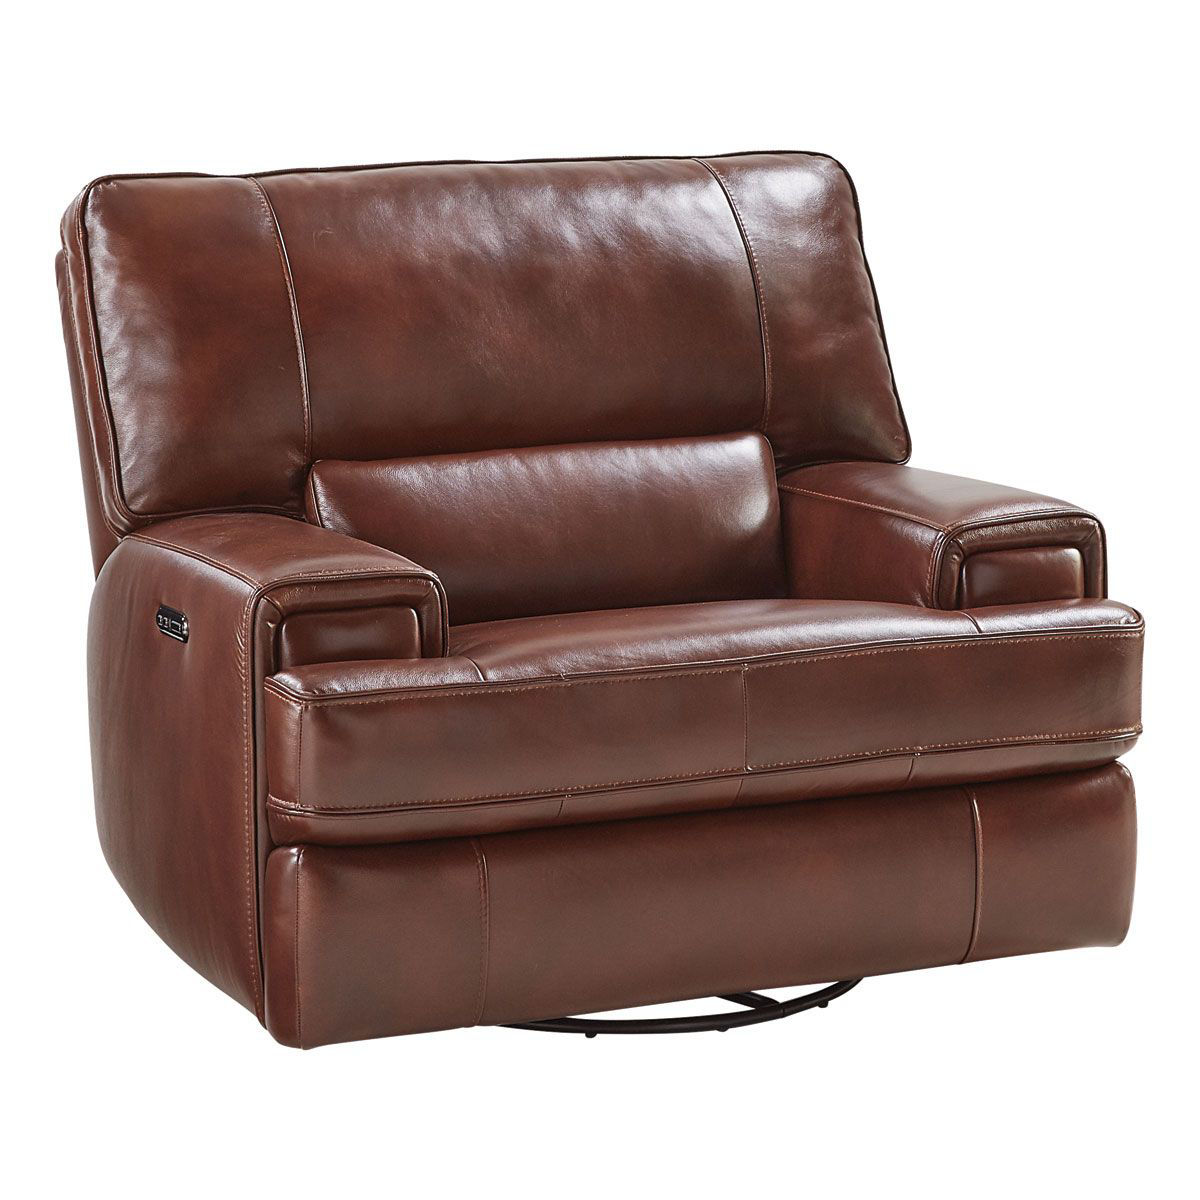 12 Best Accessories for Upgrading Your Recliner Chair